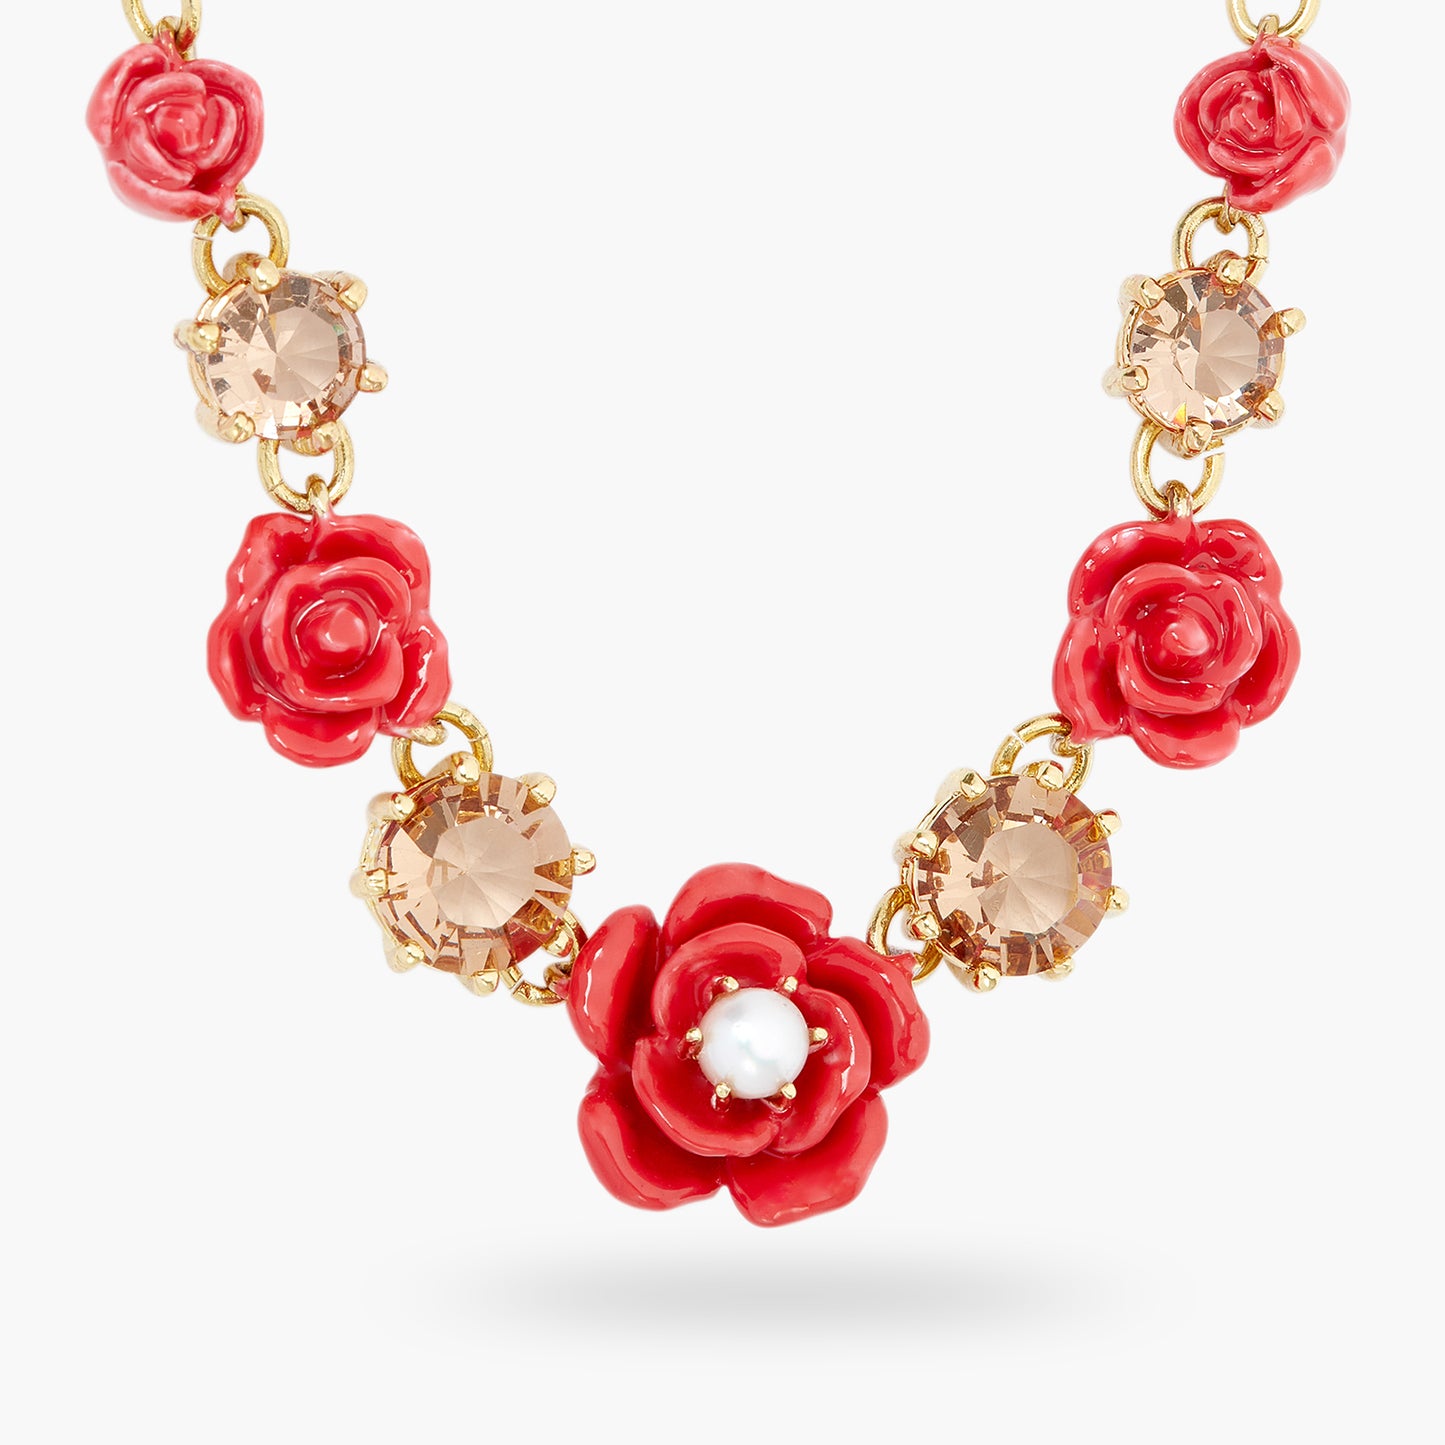 Roses, cultured pearl and stone statement necklace | ASAR3061